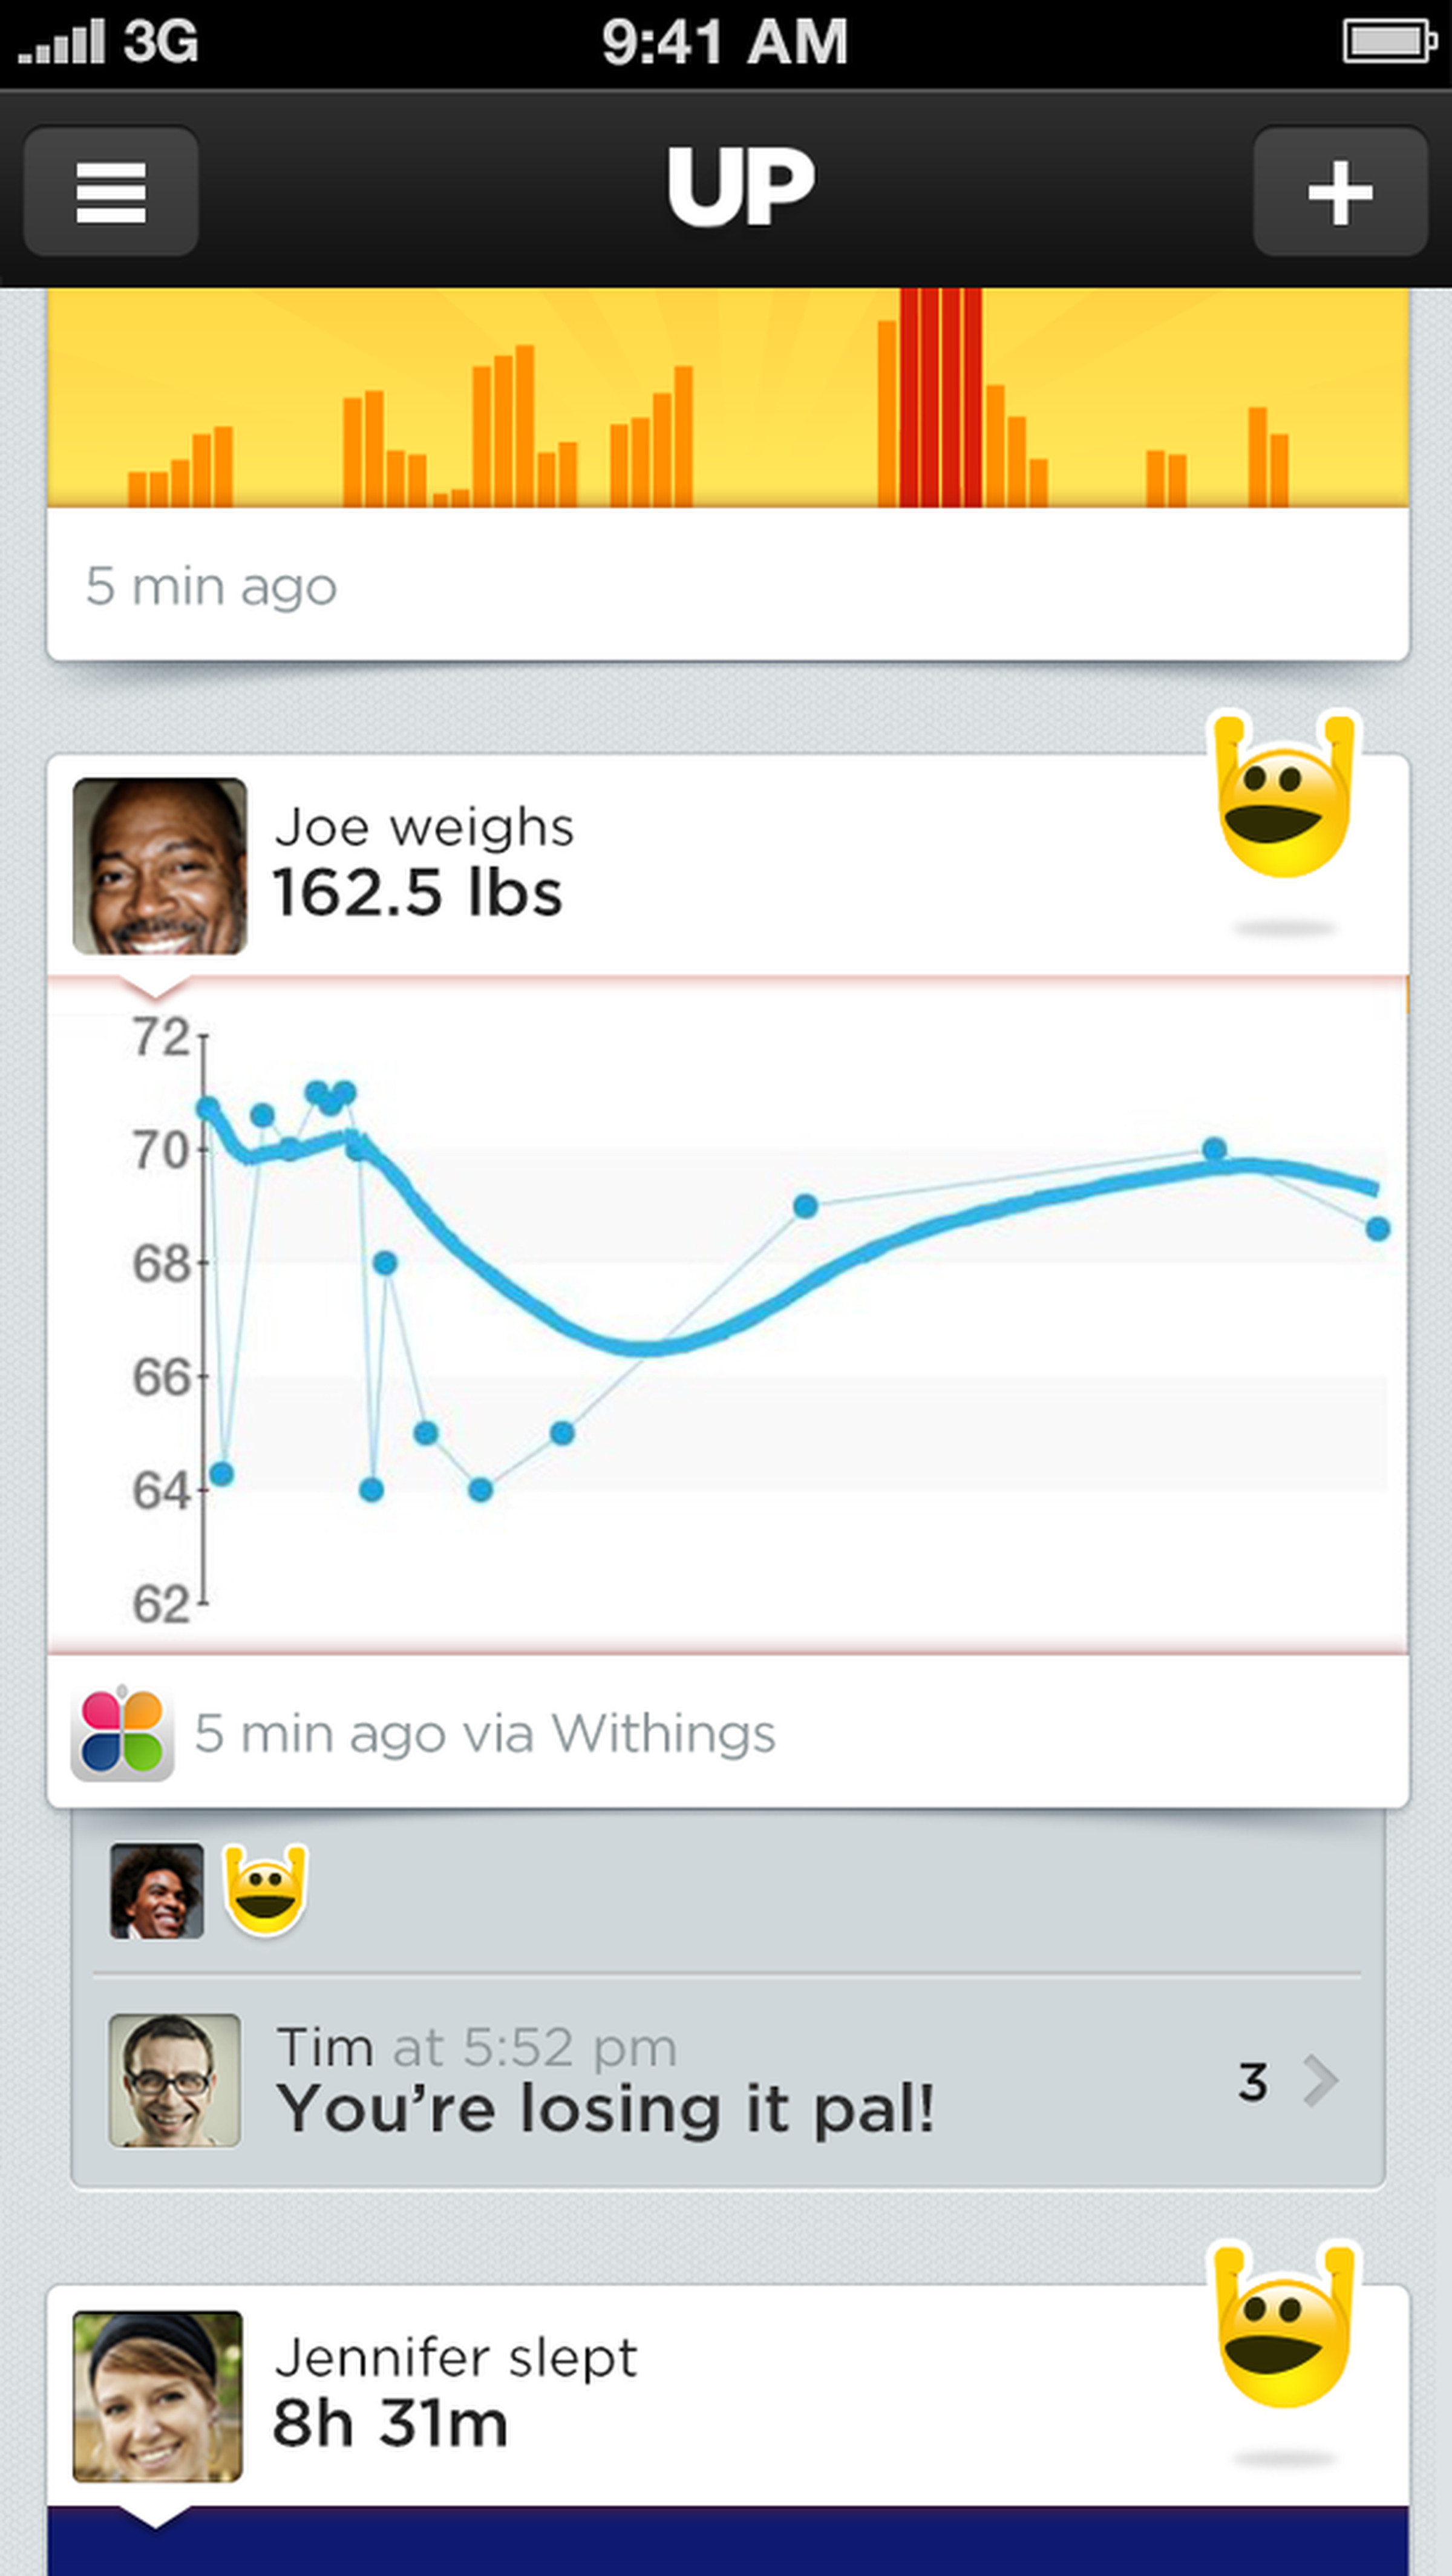 Jawbone Up app 2.5 for iOS with Up Platform support